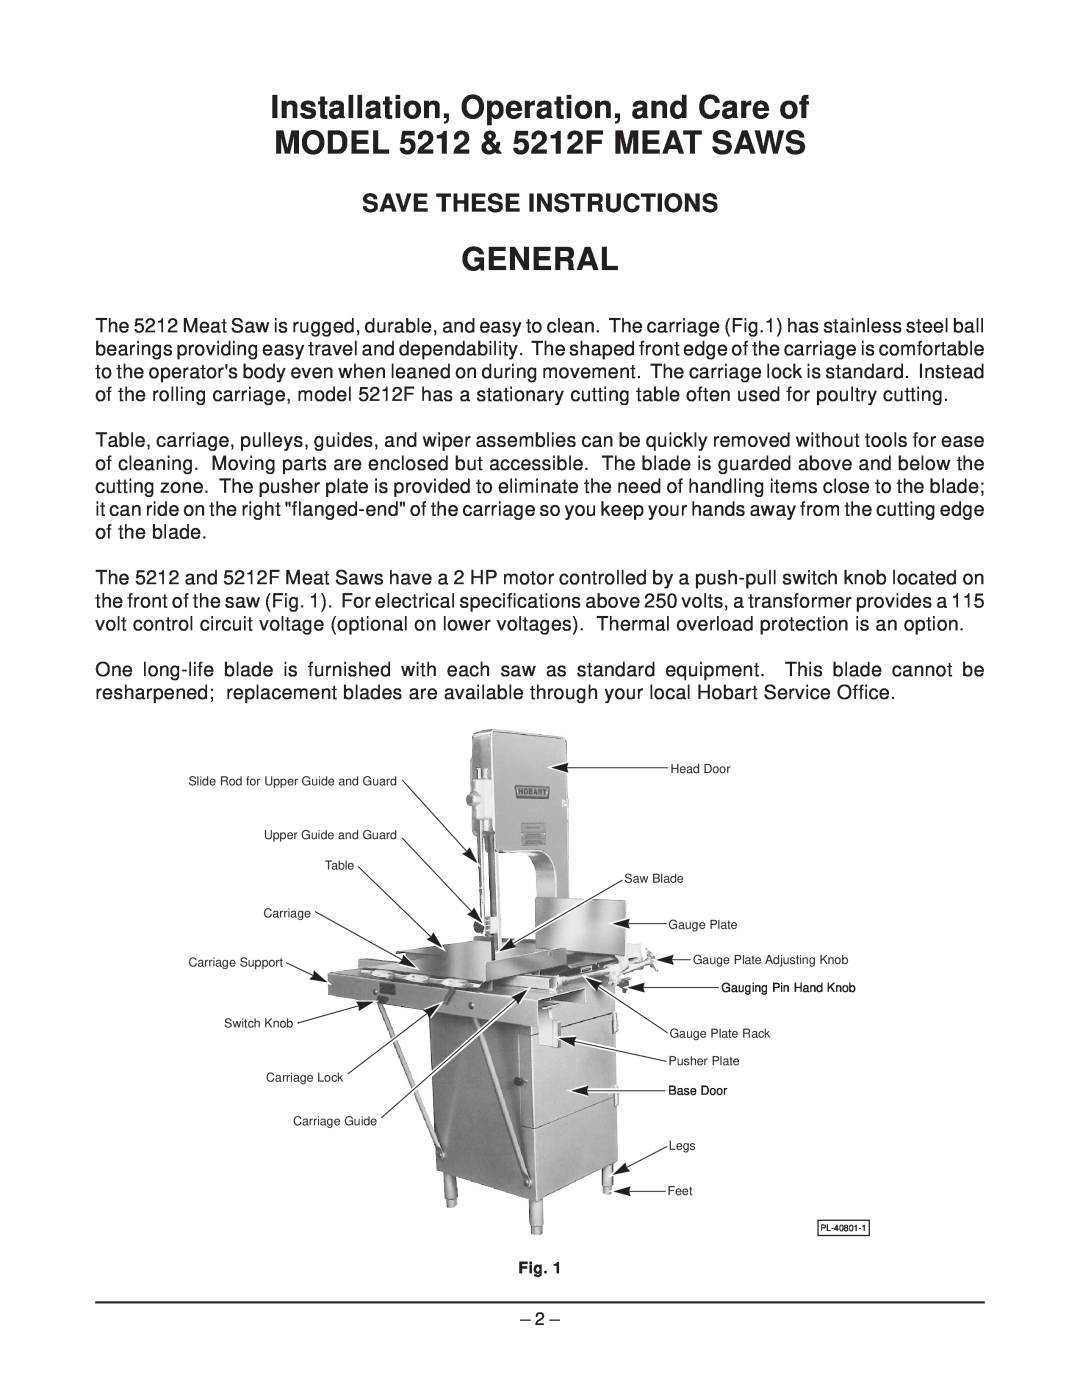 Hobart manual Installation, Operation, and Care of MODEL 5212 & 5212F MEAT SAWS, General, Save These Instructions 